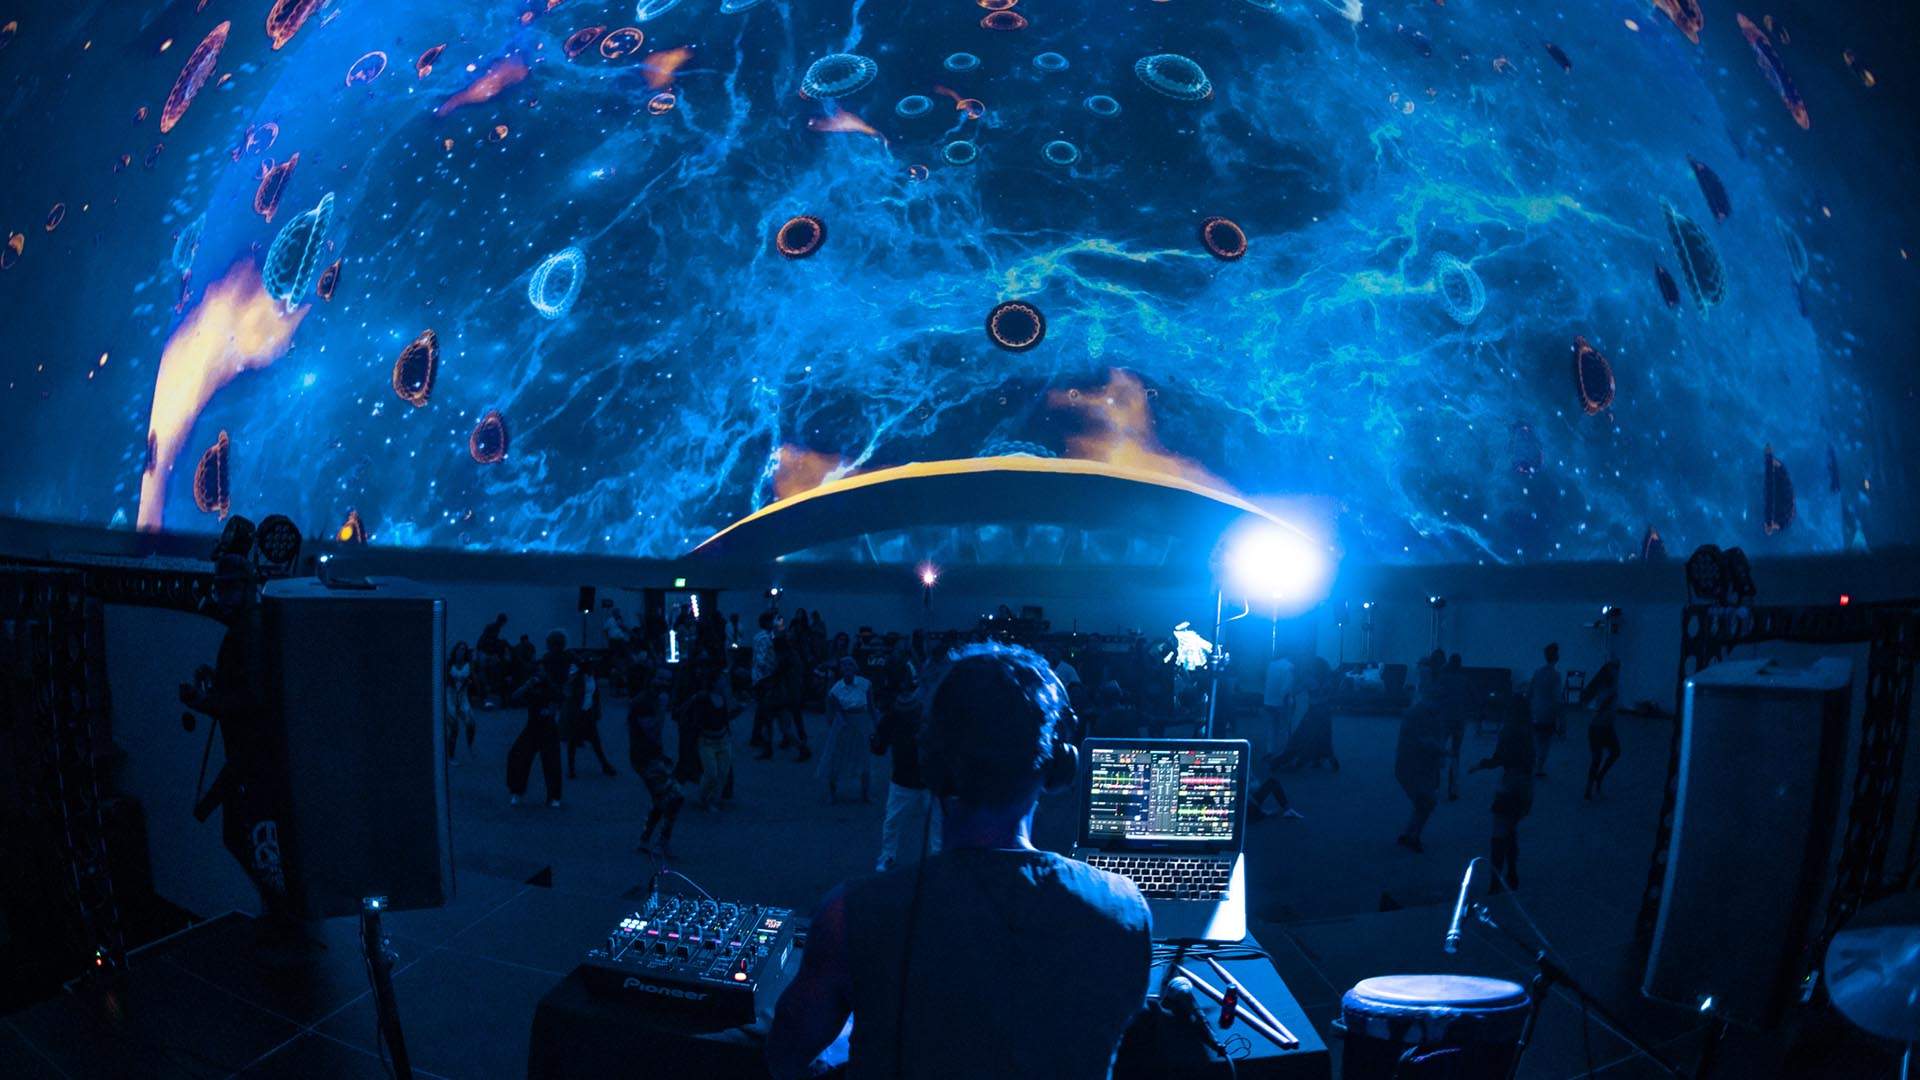 Wonderdome Is Sydney's New Pop-Up Cinema That's Screening Immersive 360-Degree Films in a Giant Dome